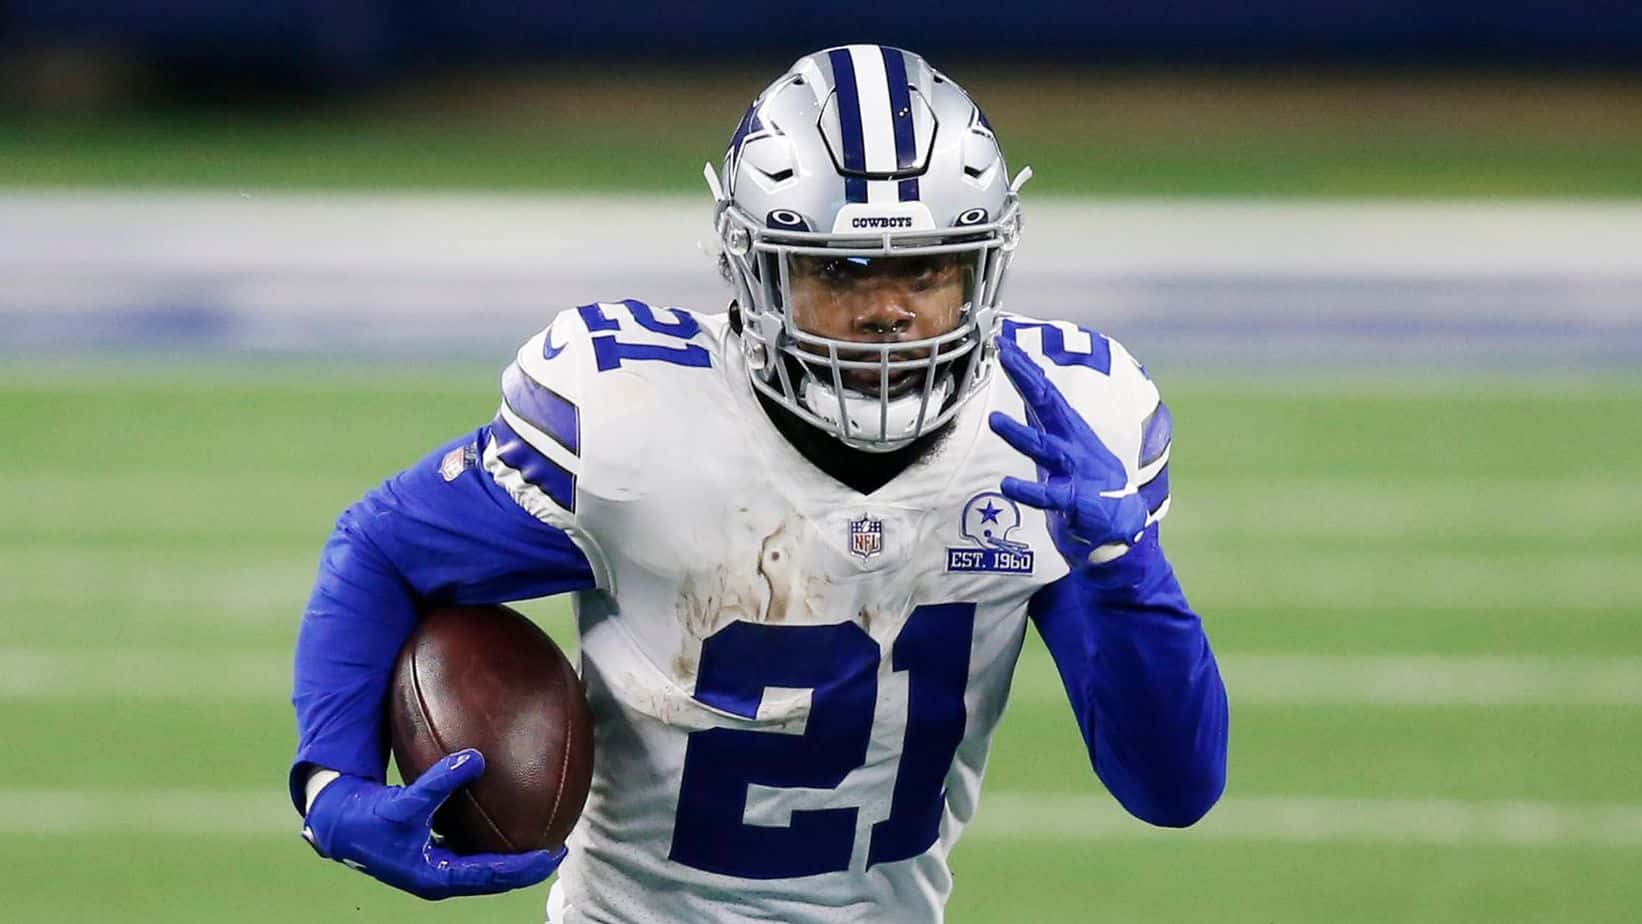 After recording the best times in several dashes, Ezekiel Elliott was named...